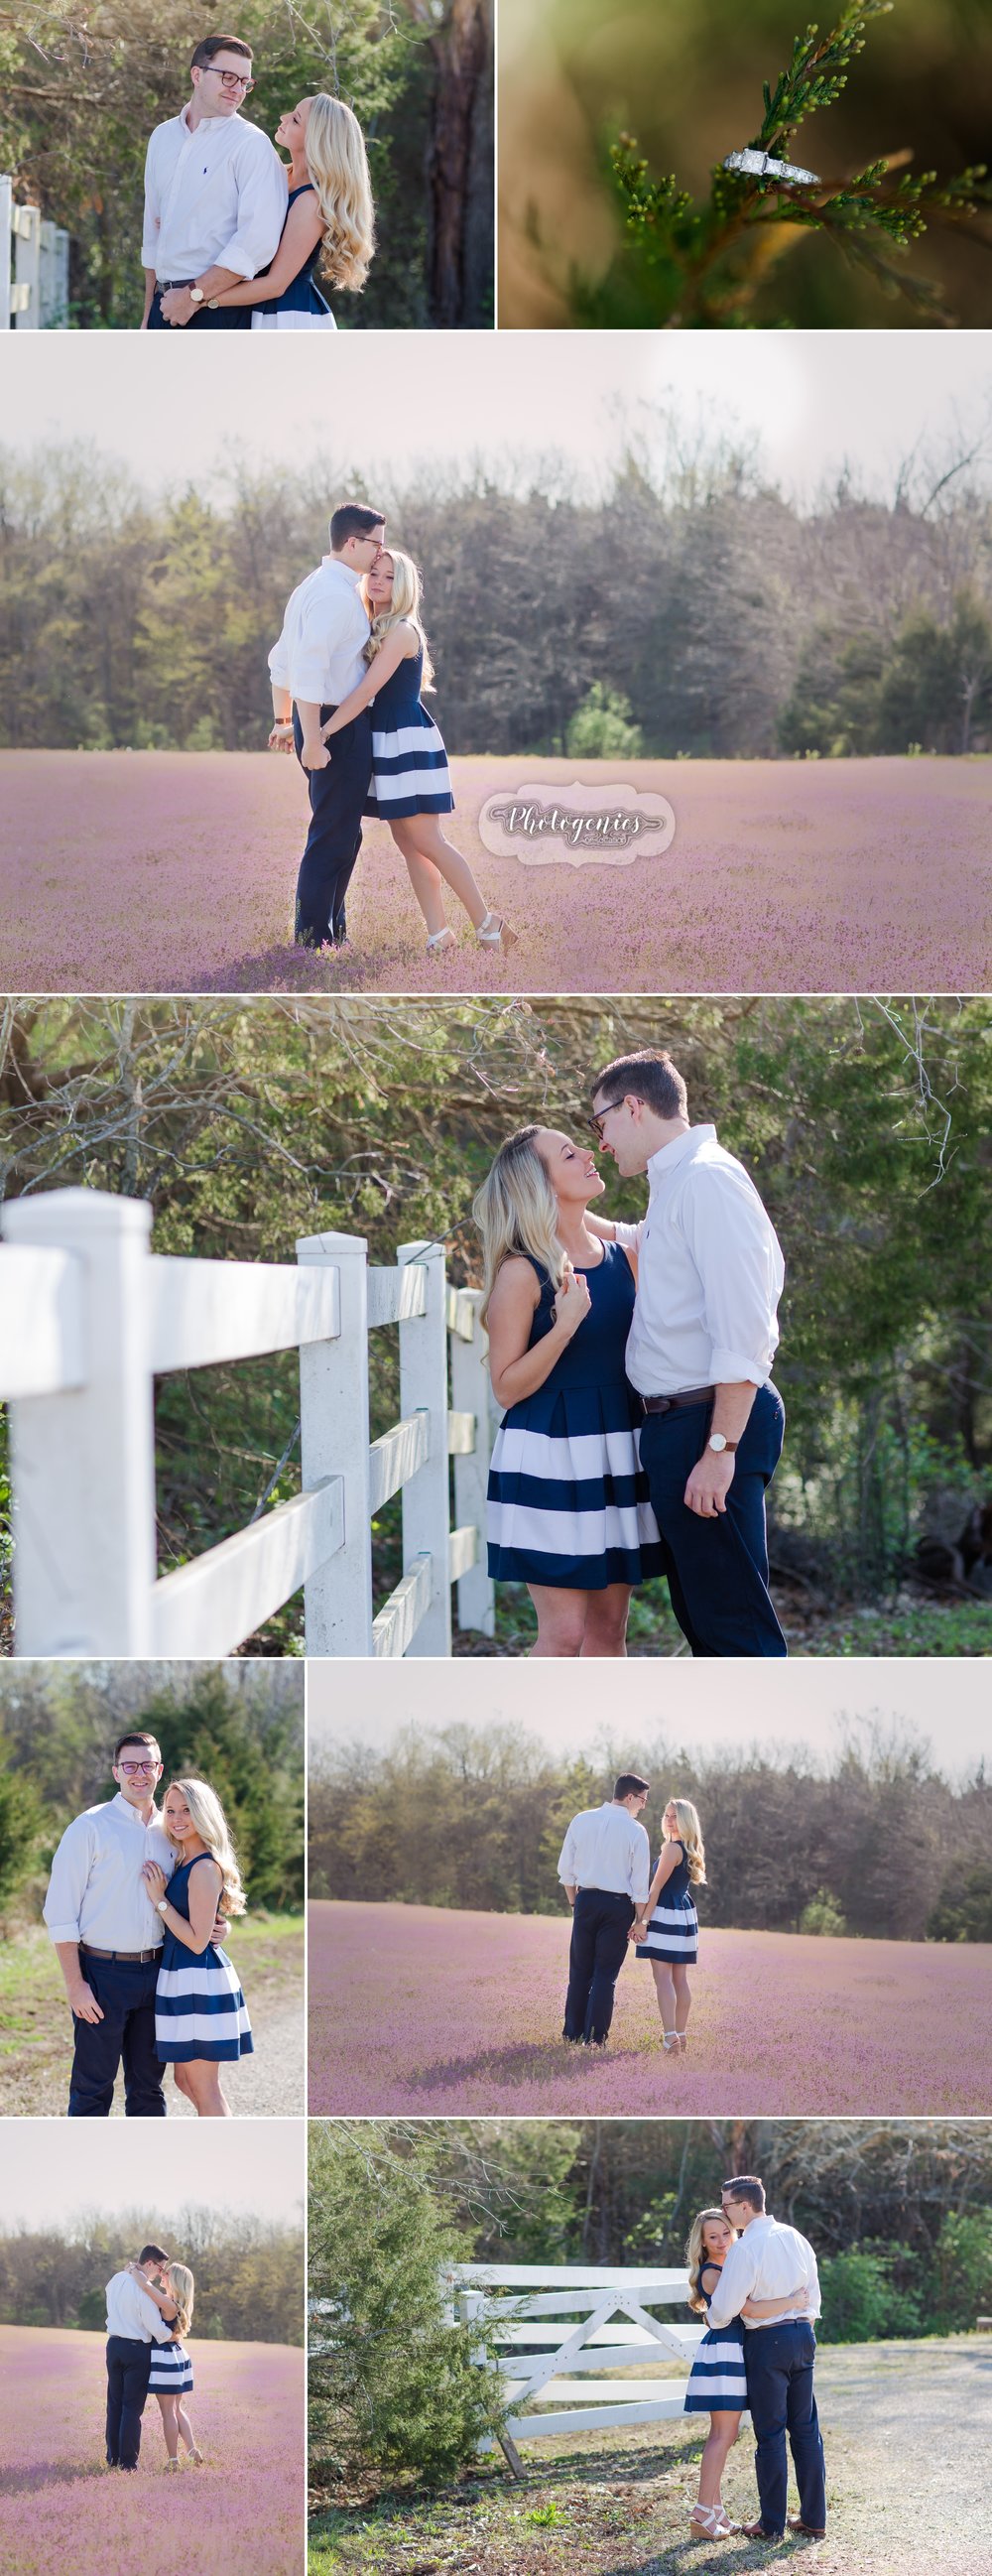  engagement_morning_pictures_field_flowers_poses_wedding_ideas_greenery_spring_lake_pond 2 